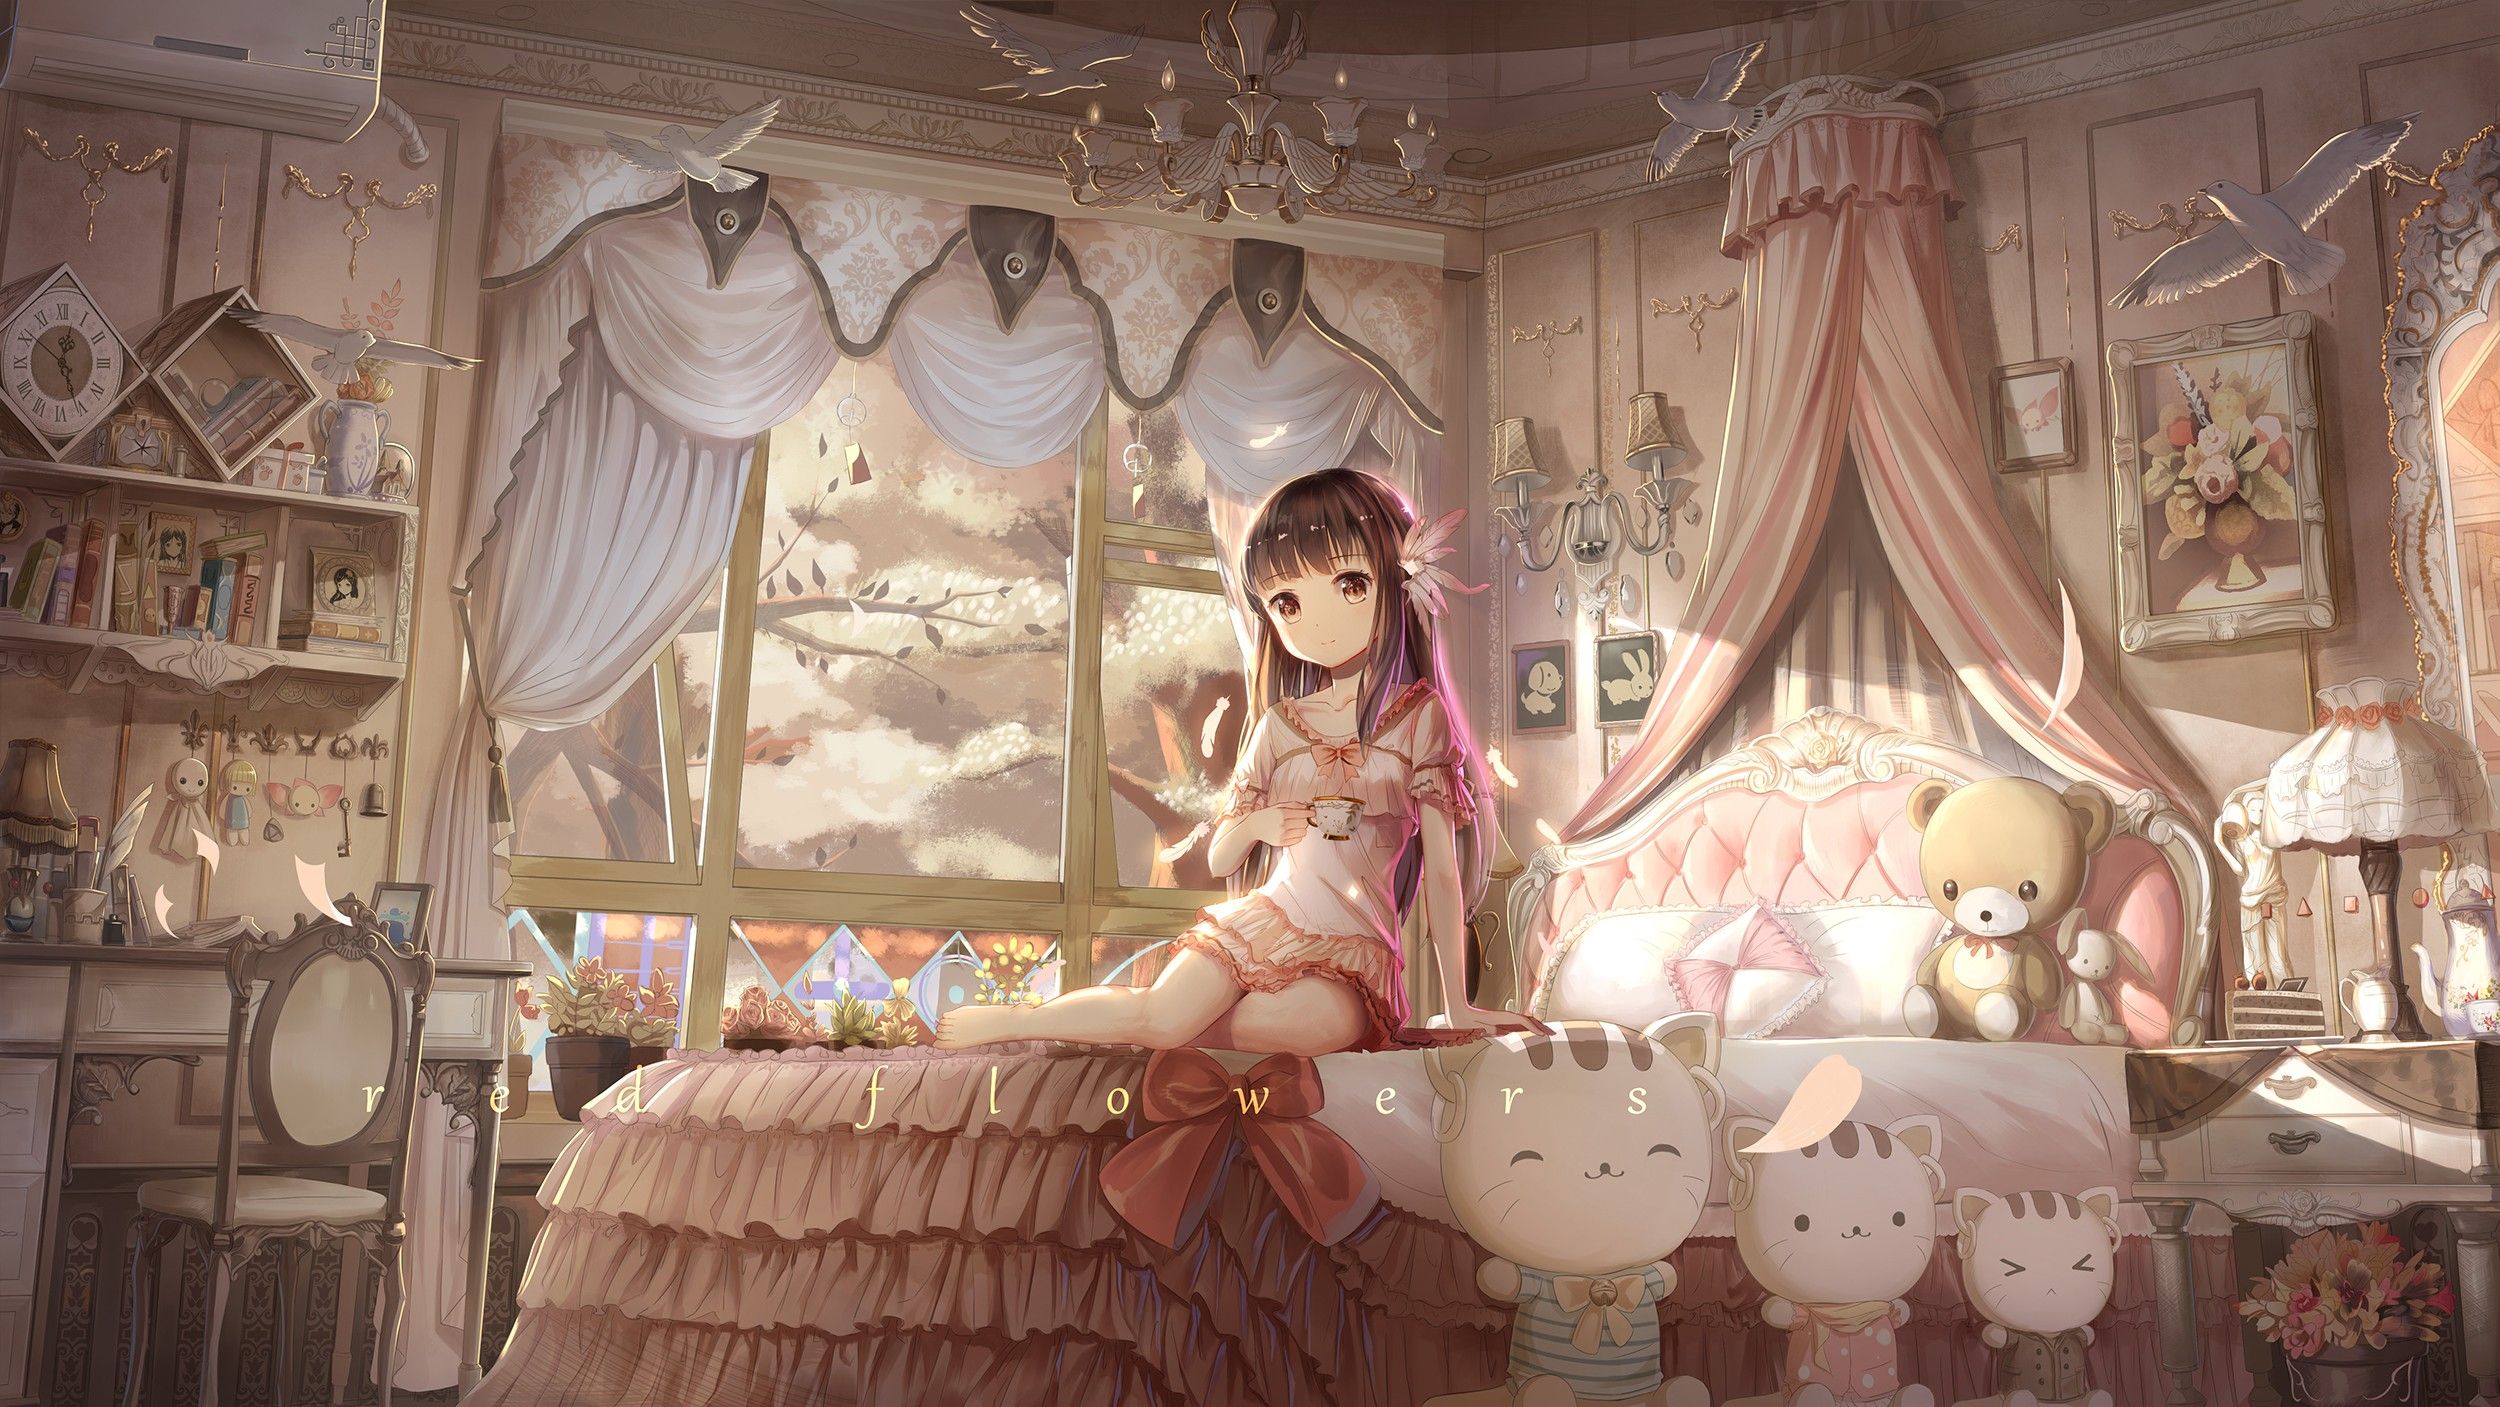 Download A Cute Anime Bedroom, Full of Colorful Personality | Wallpapers.com